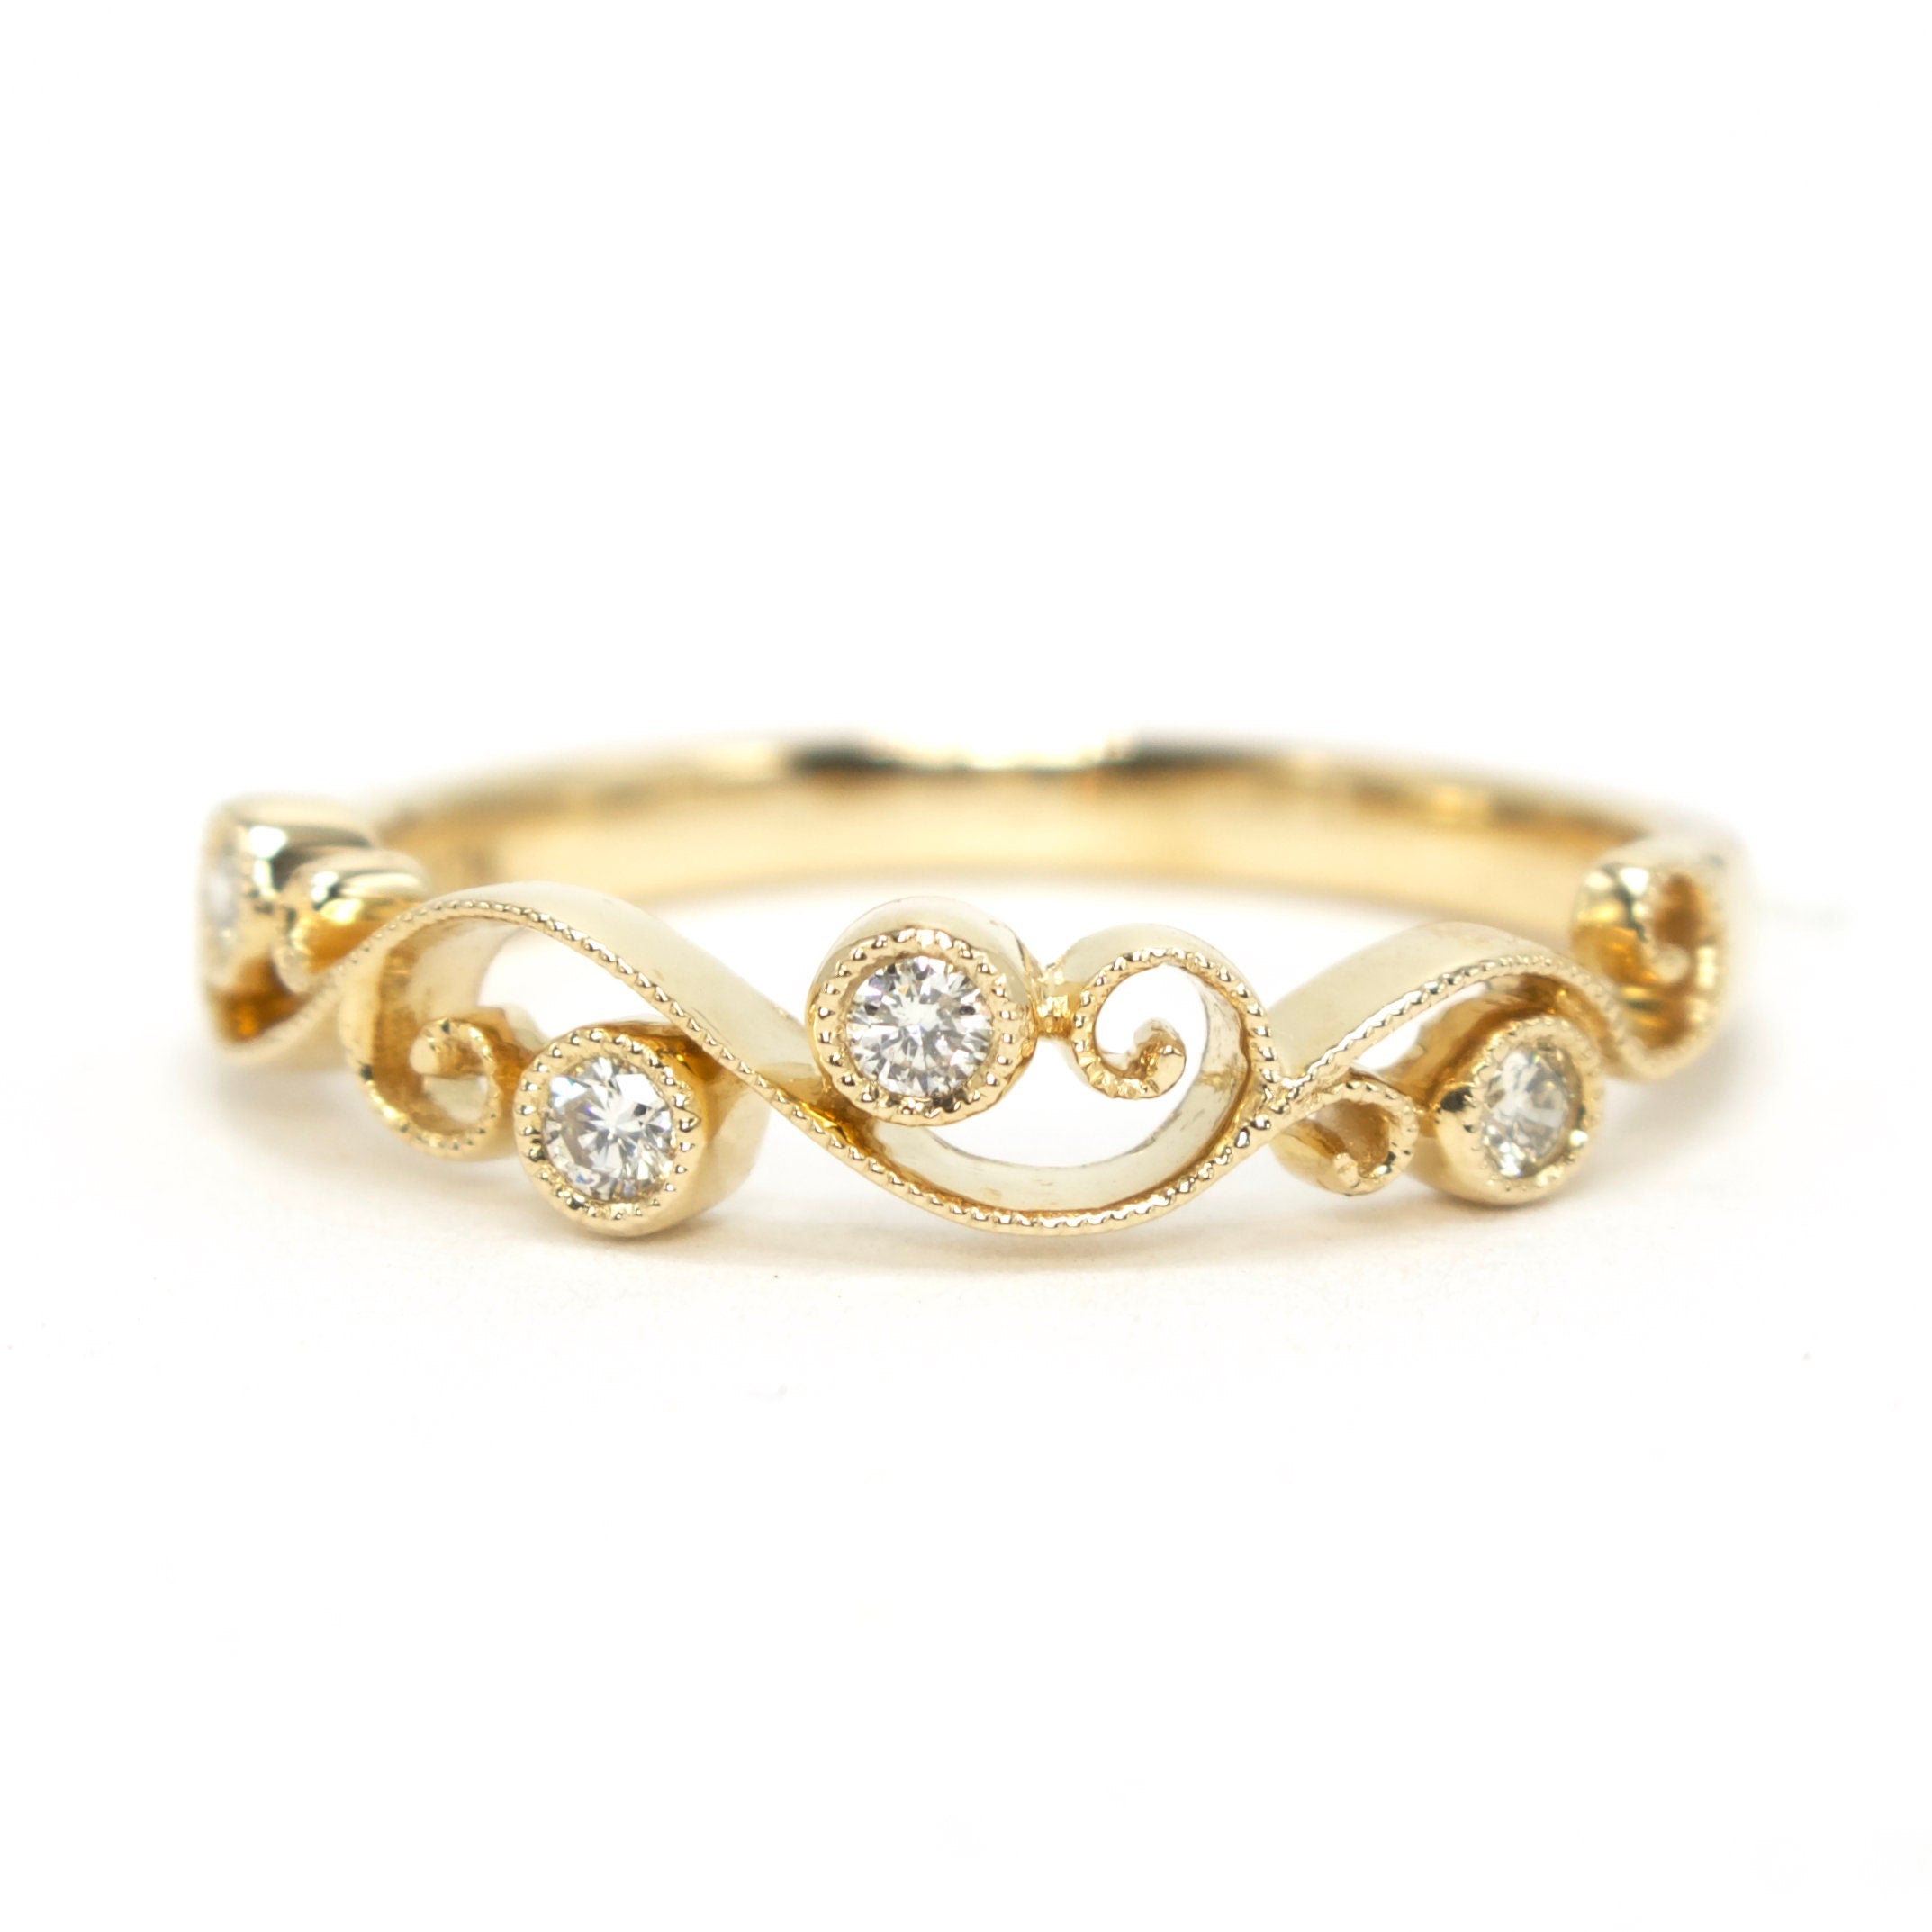 Nature Inspired Vine Motif Wedding Band in Yellow Gold with Diamonds